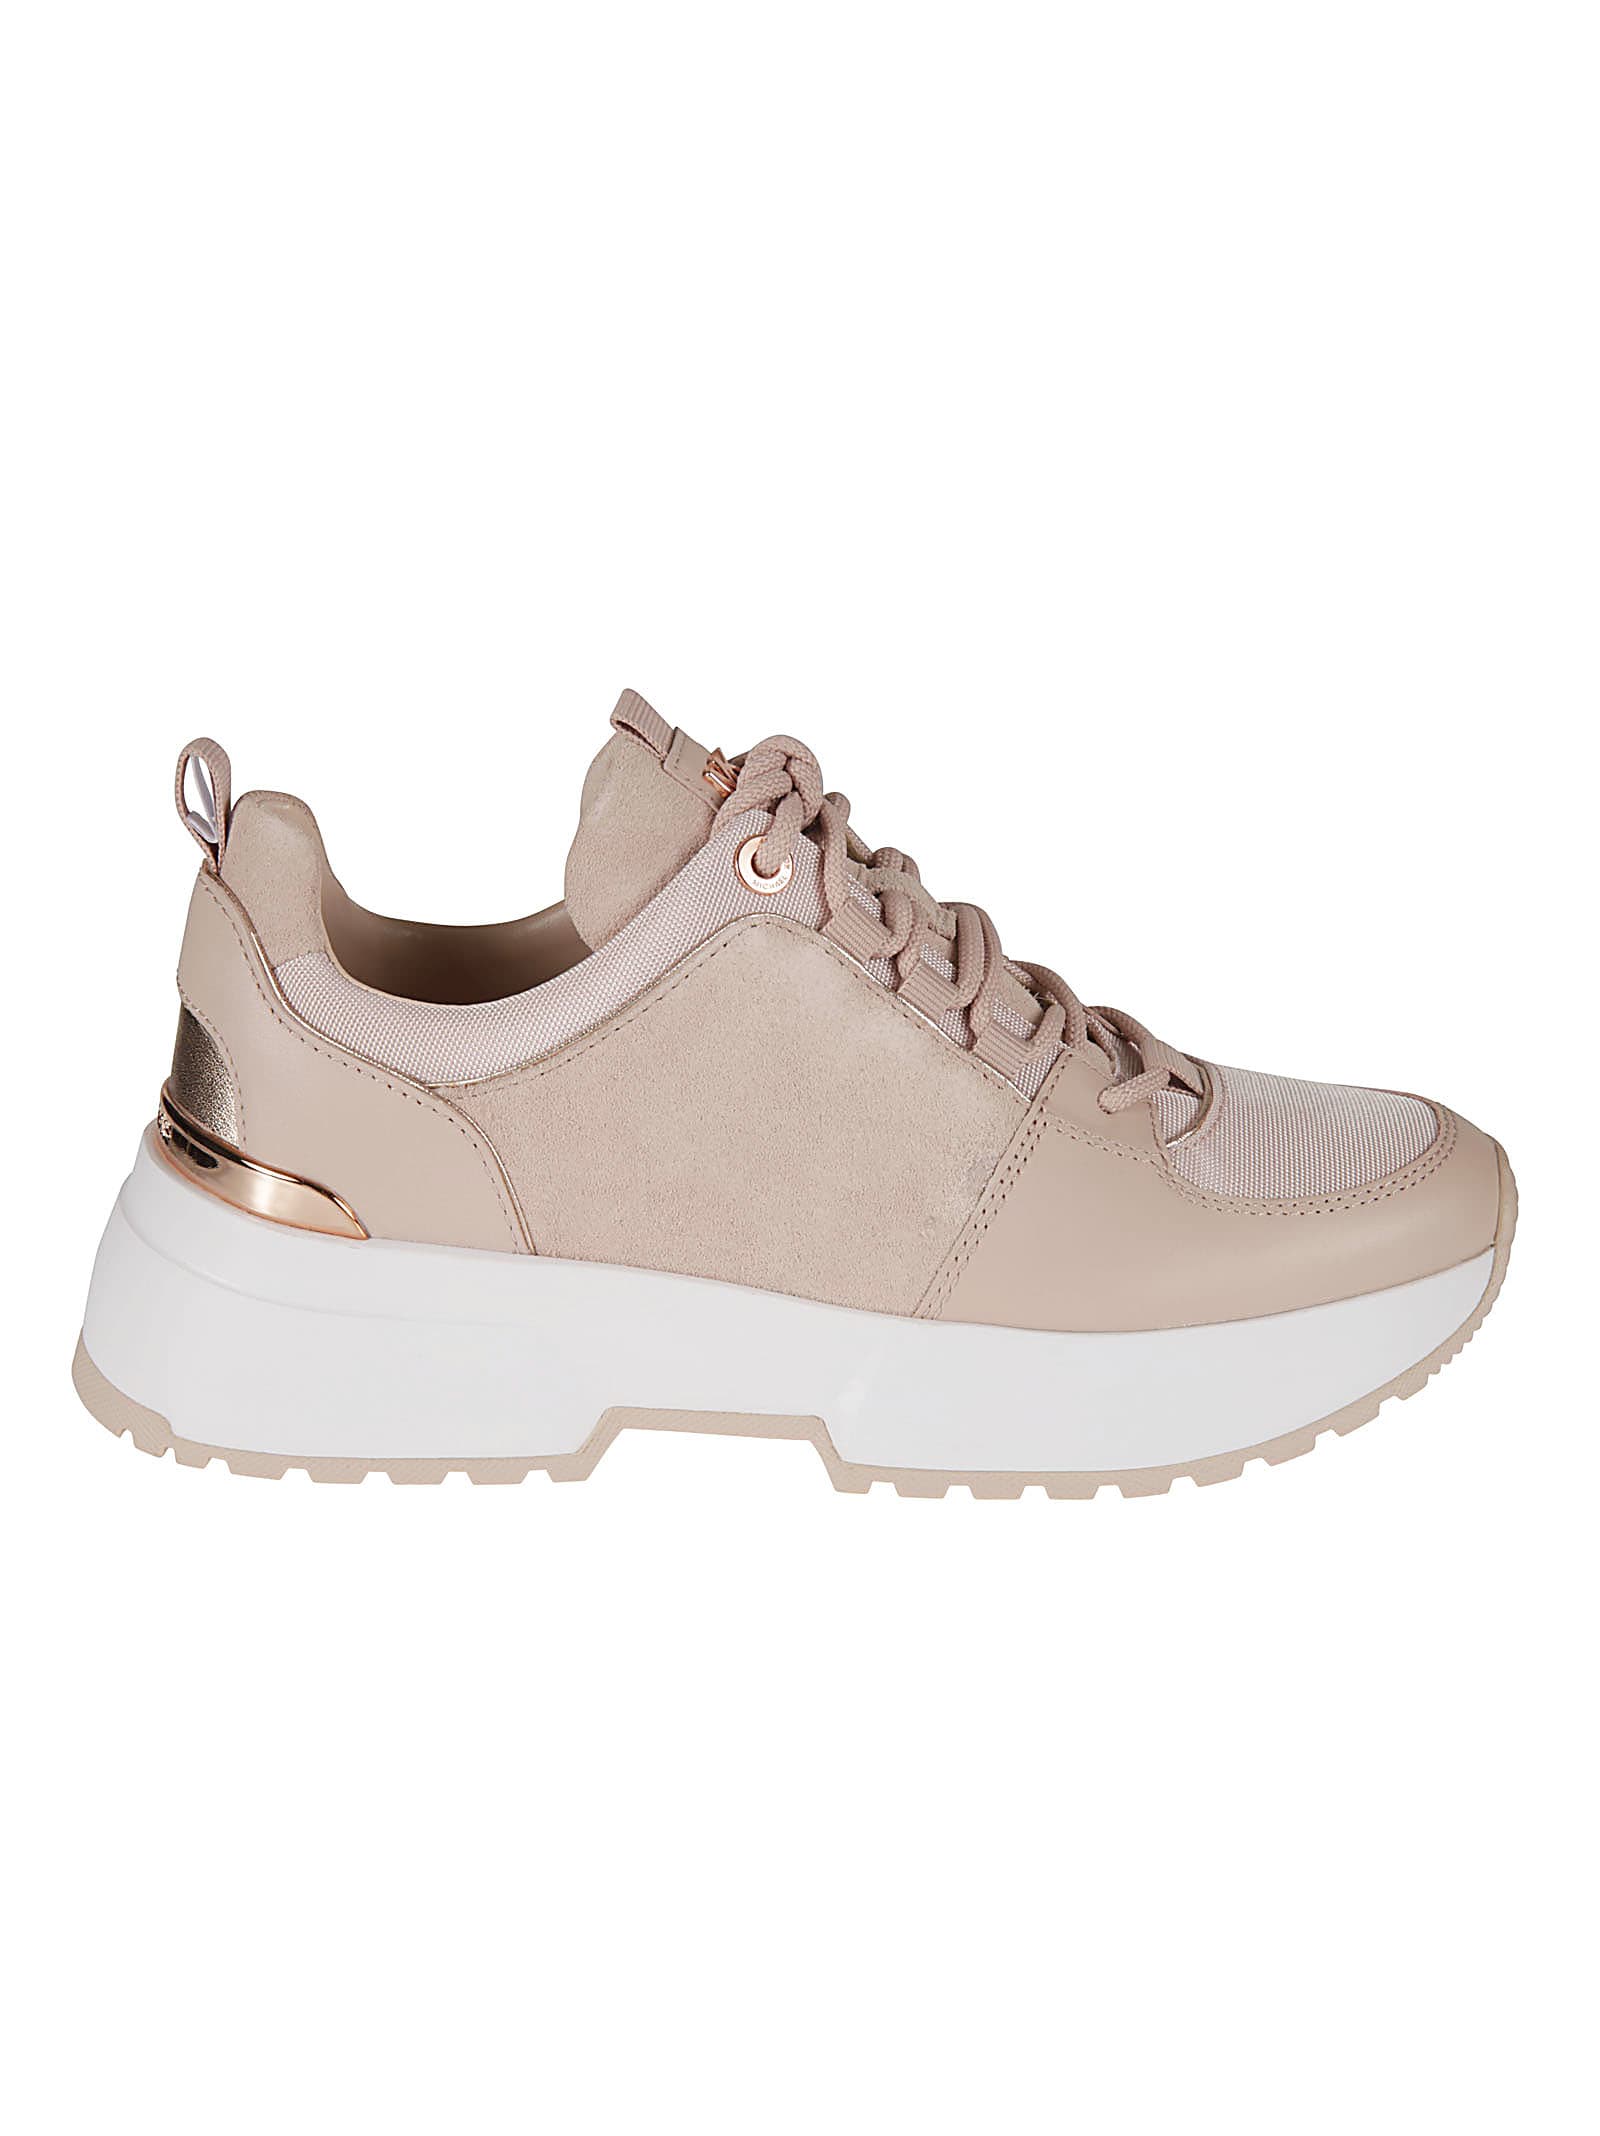 Buy Michael Kors Cosmo Sneakers online, shop Michael Kors shoes with free shipping